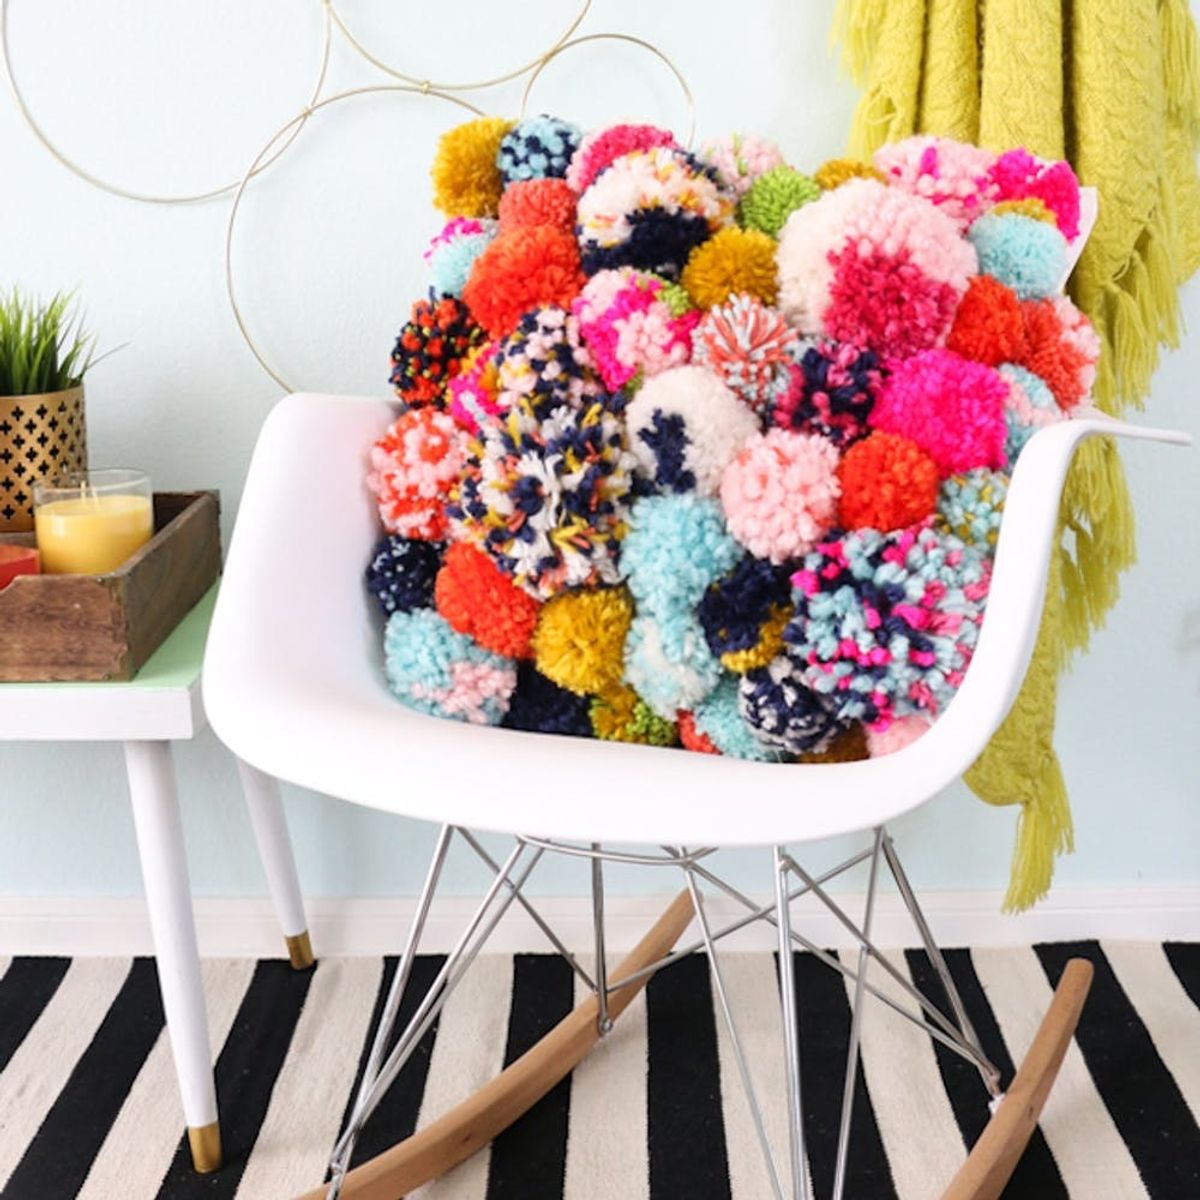 What to Make This Weekend: Pom Pom Pillows, Wood Engraved Map + More